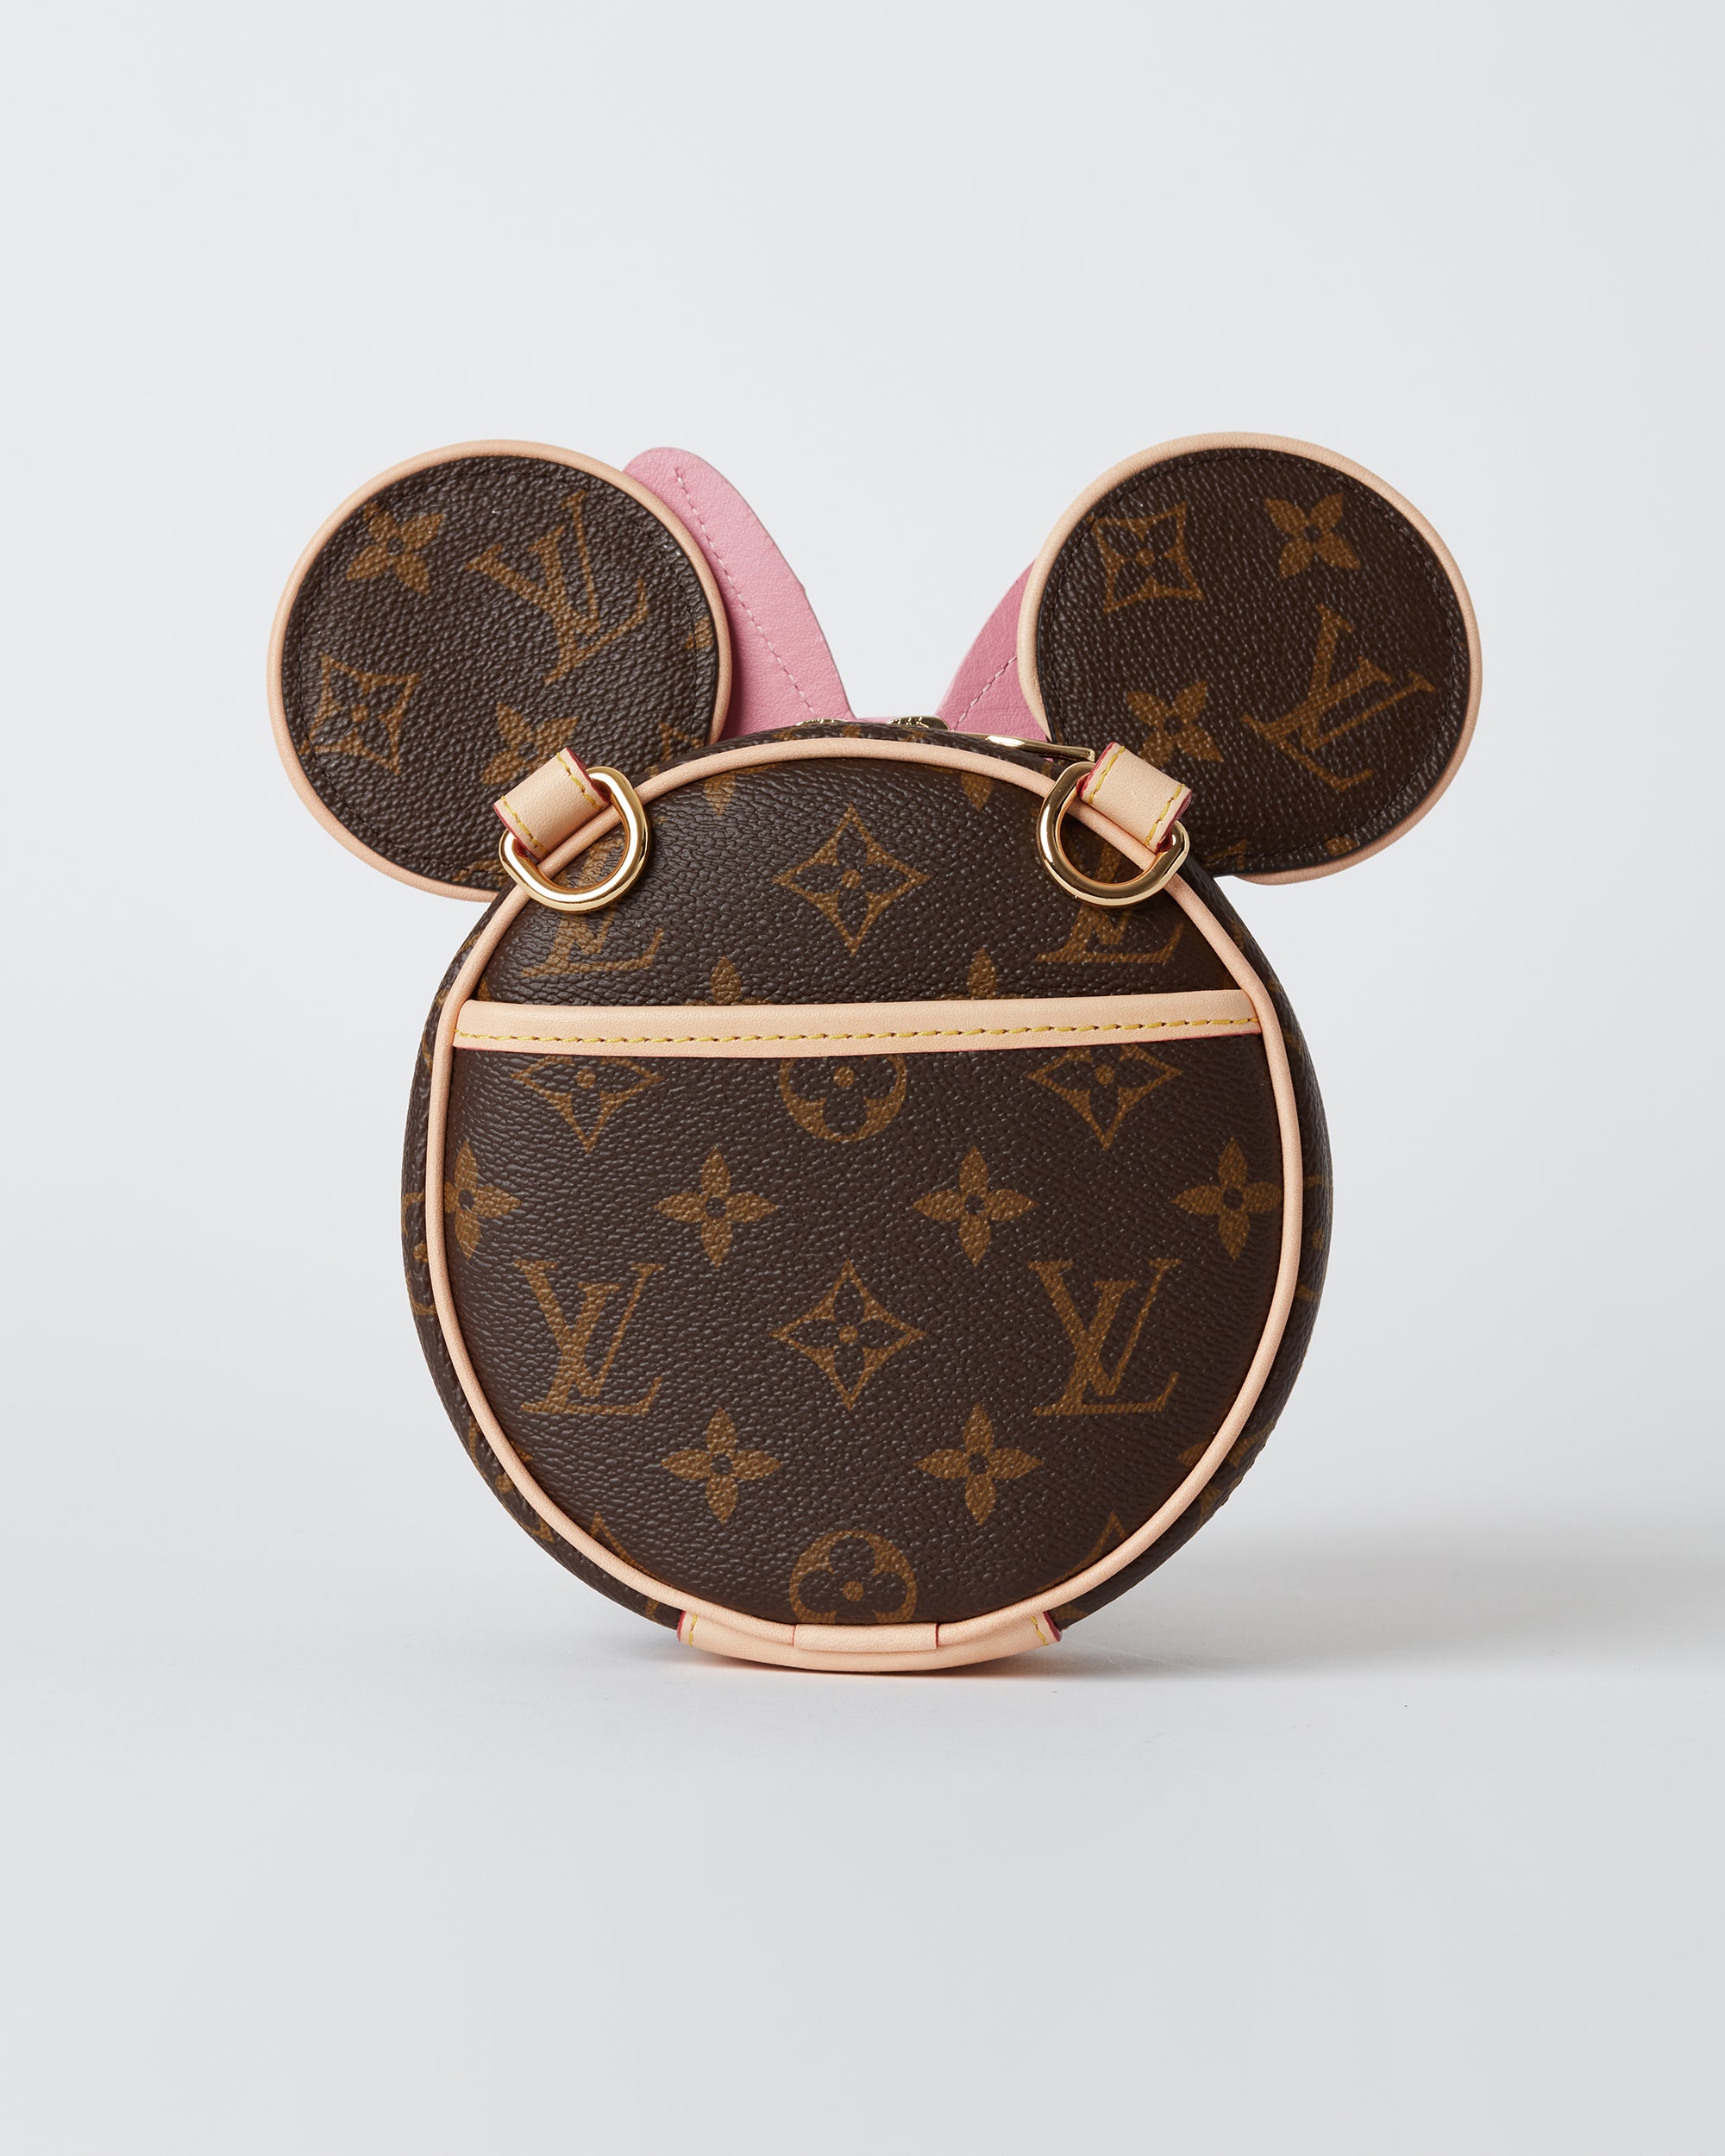 Hand Painted Louis Vuitton Zippy Coin Purse w/ Minnie Mouse